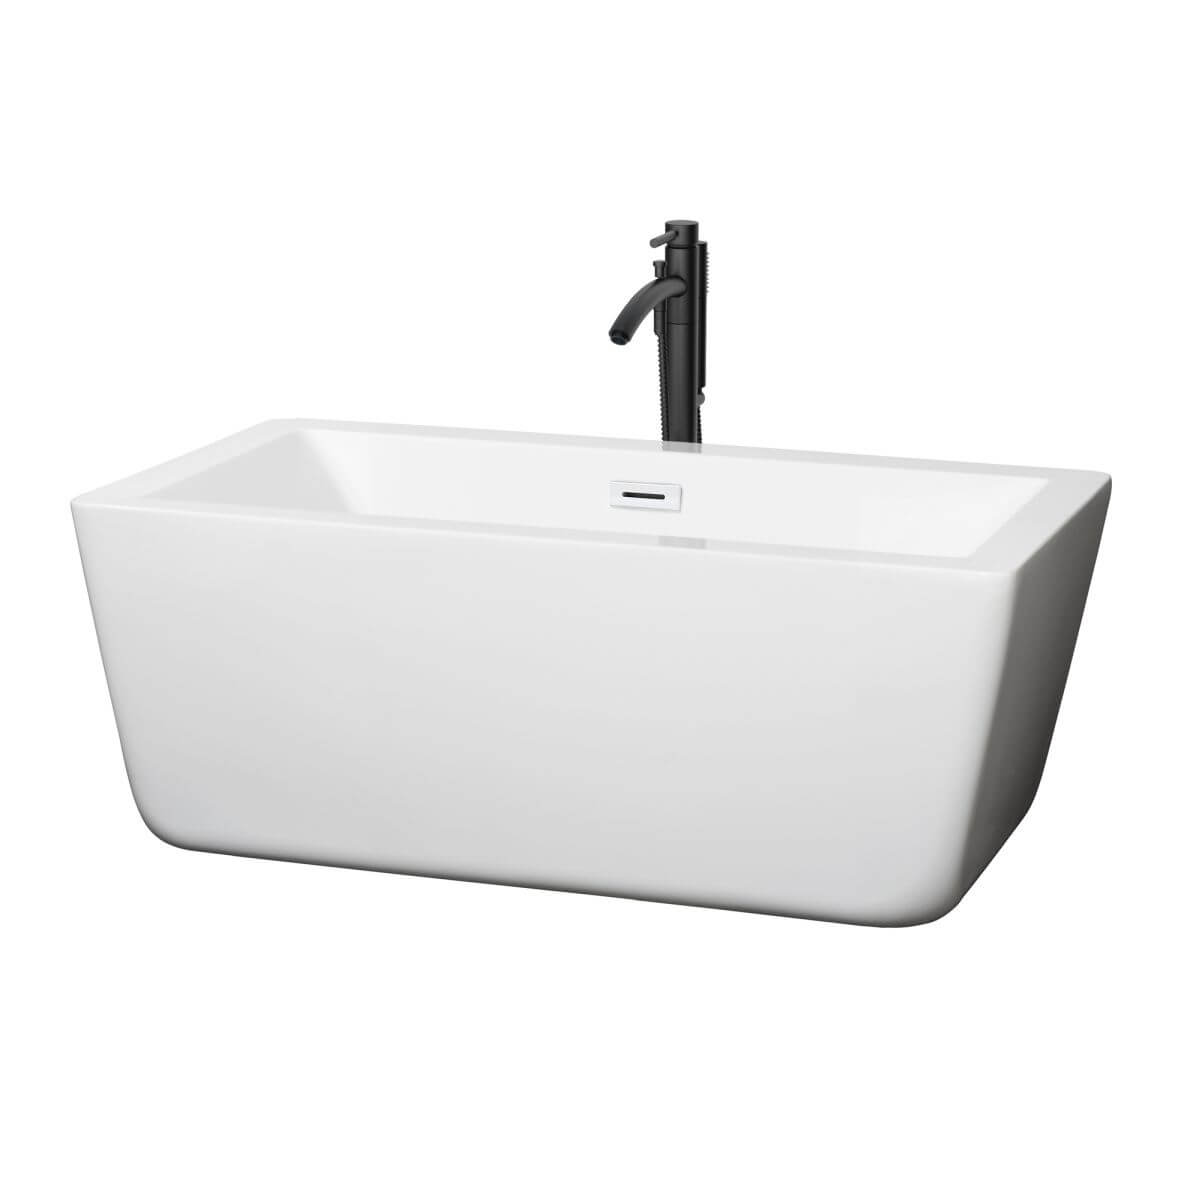 Wyndham Collection Laura 59 inch Freestanding Bathtub in White with Shiny White Trim and Floor Mounted Faucet in Matte Black - WCOBT100559SWATPBK